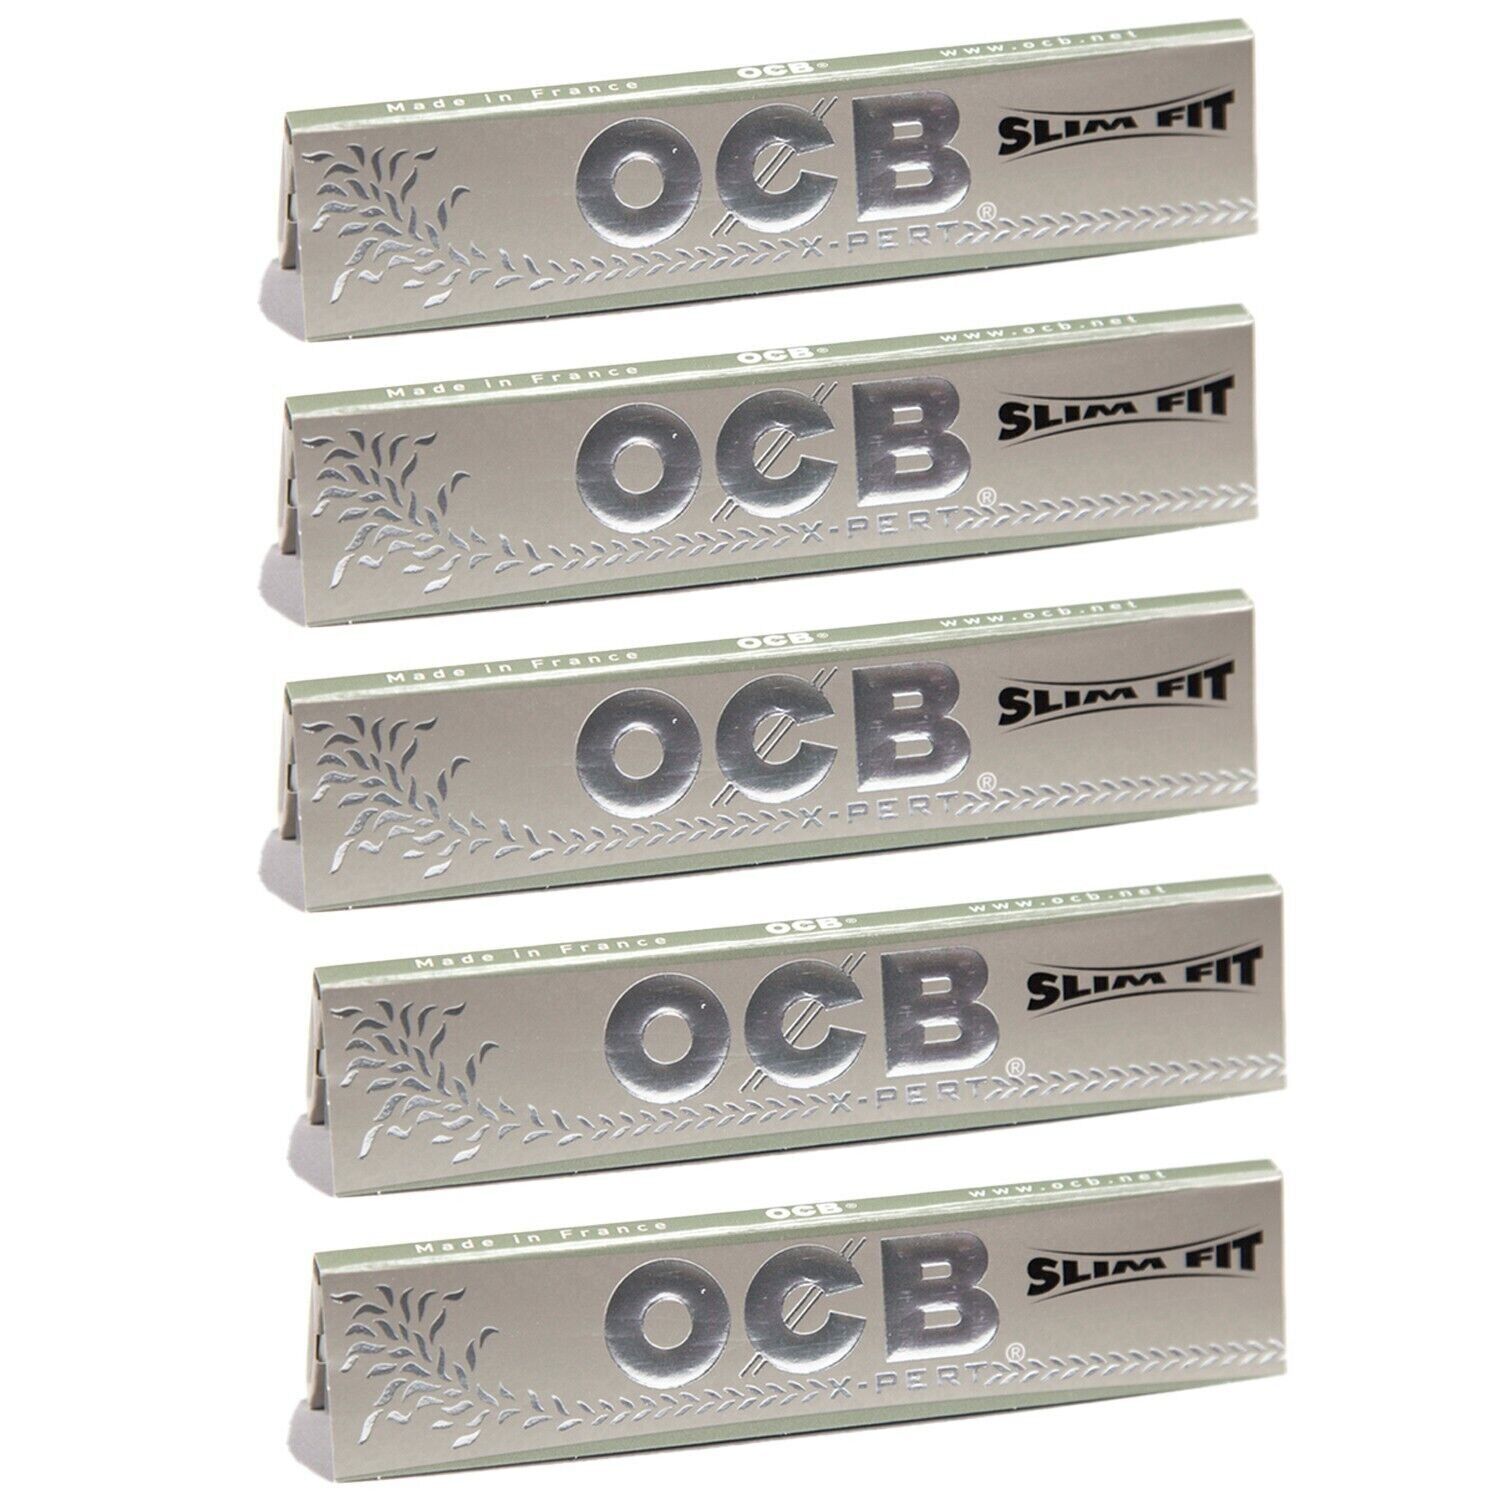 Ocb X-Pert Slim Fit Rolling Papers 5 Booklets